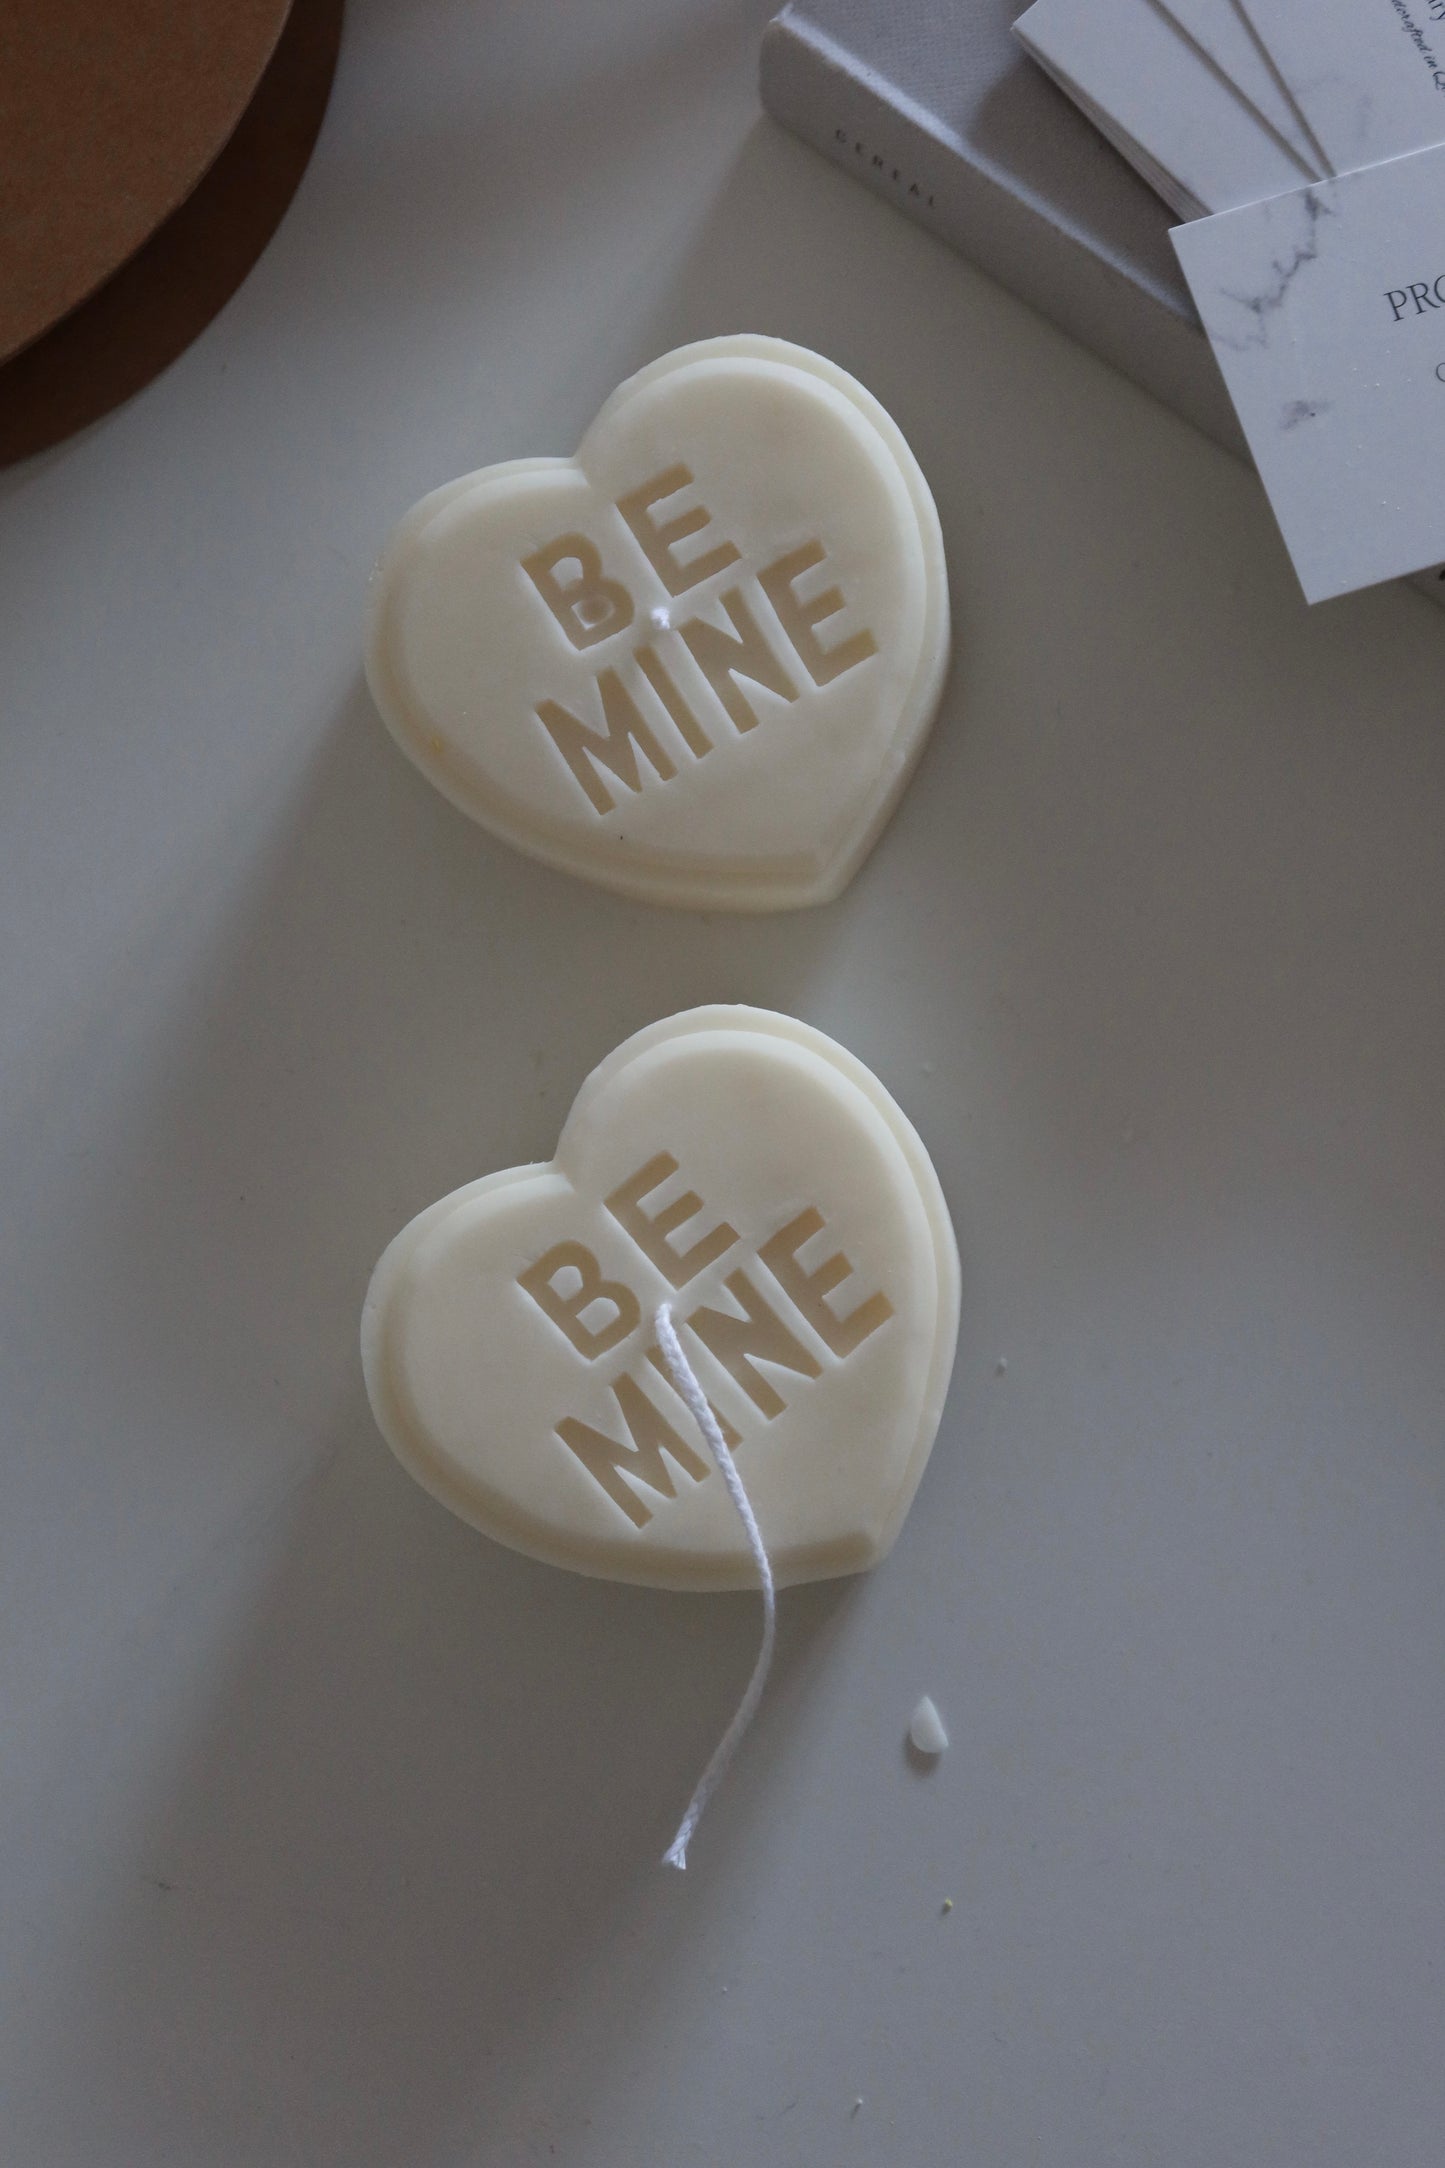 Be mine - Heart candle